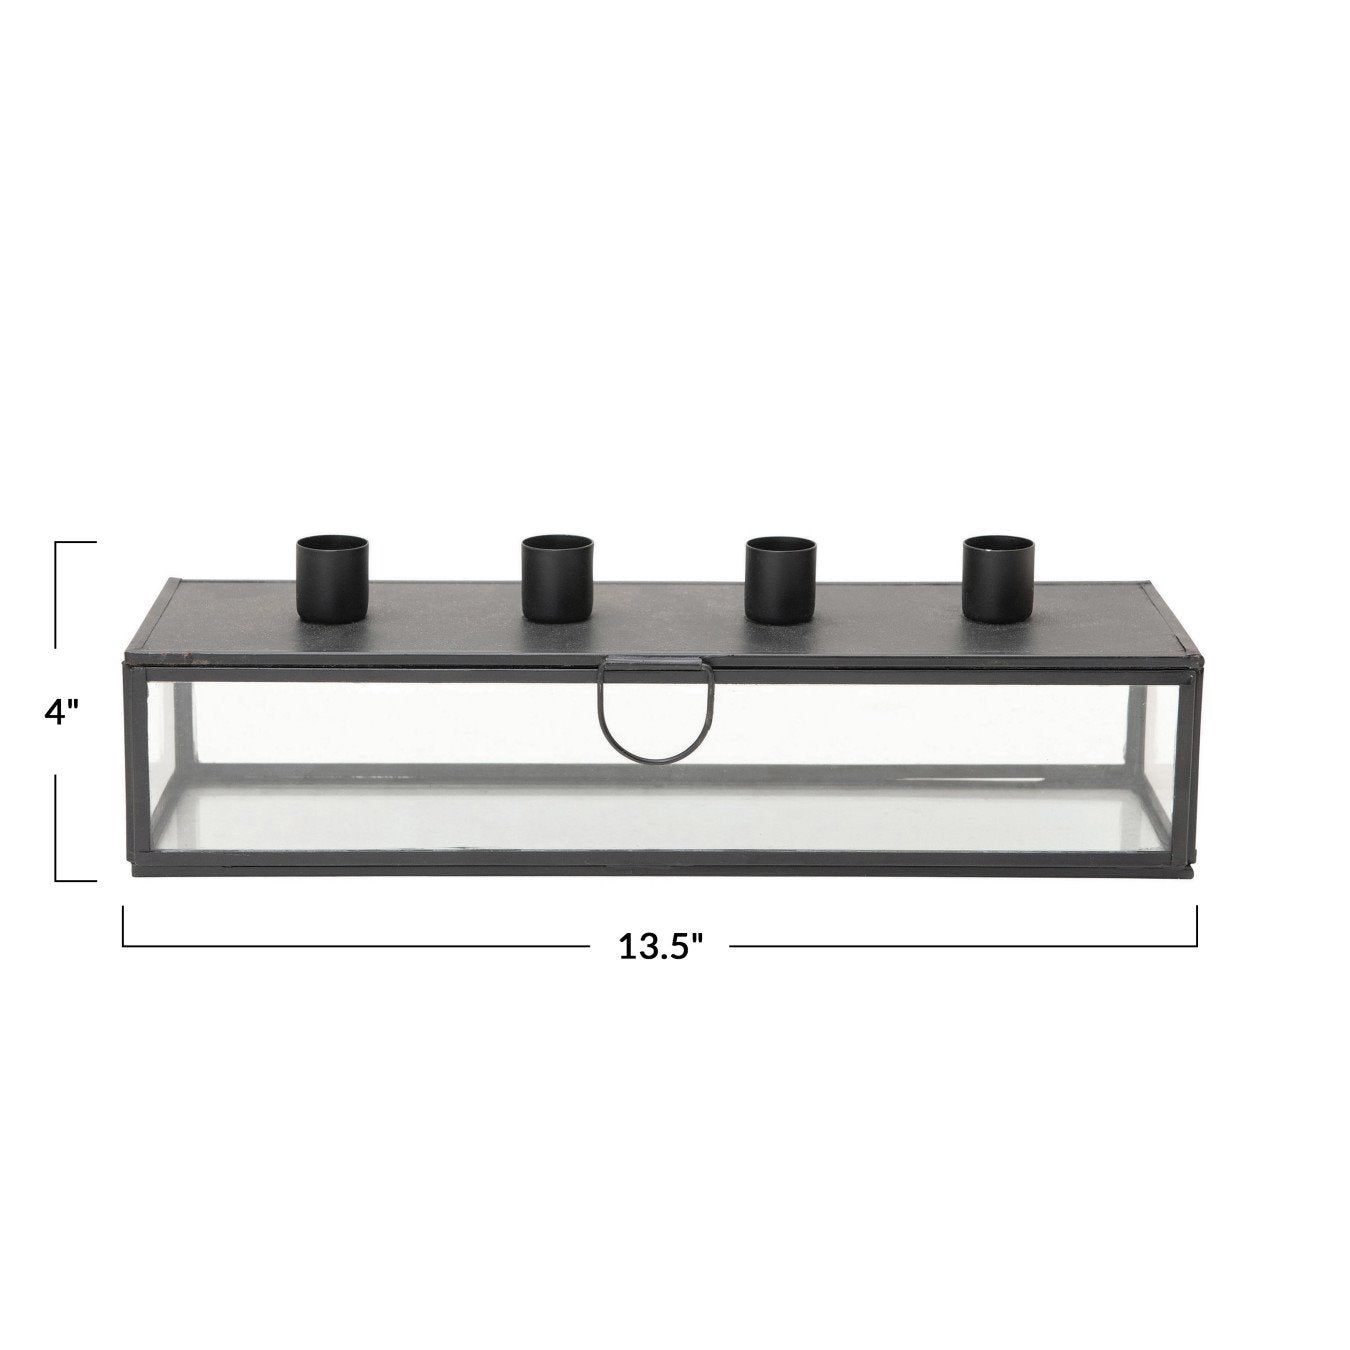 Metal & Glass Display Case Lid, Black (Holds 4 Tapers) Candle Holder